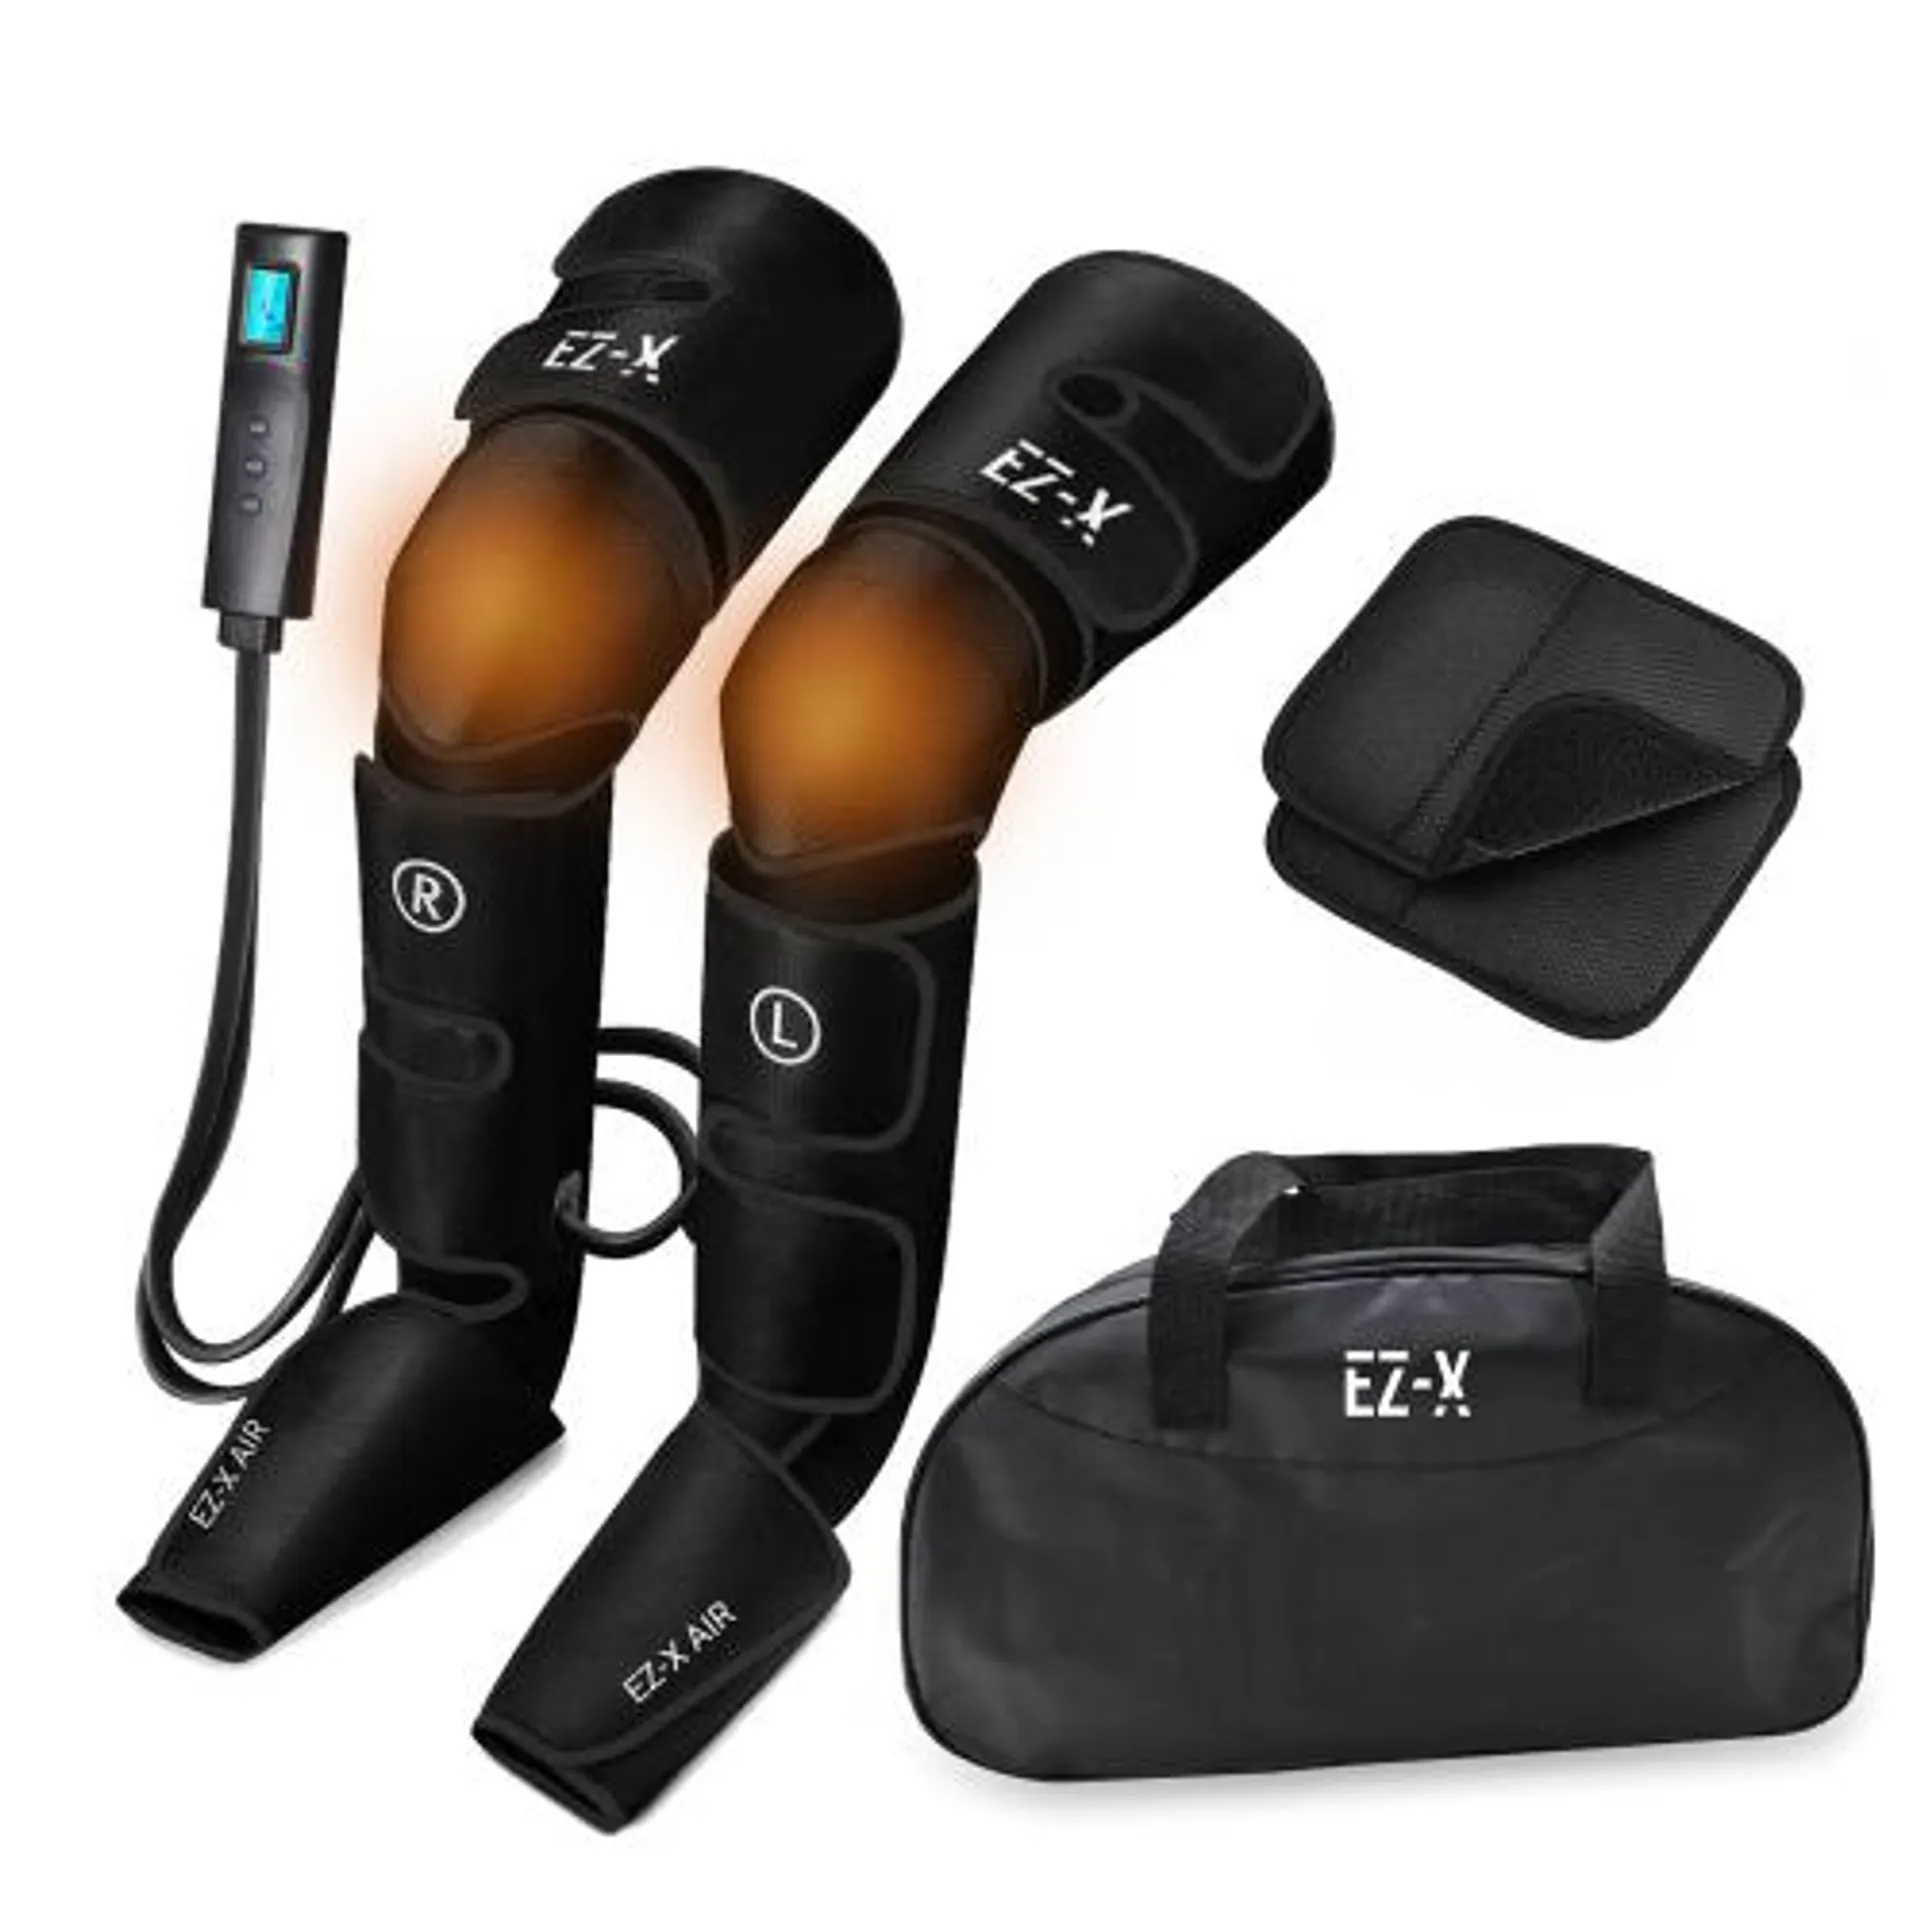 EZ-X Premium Air Compression Leg Massager with Knee Heat for Circulation,Relaxation,Recovery & Pain Relief-Calf, Thigh&Foot Massage-Adjustable Size to Fit All [With Carrying Case]